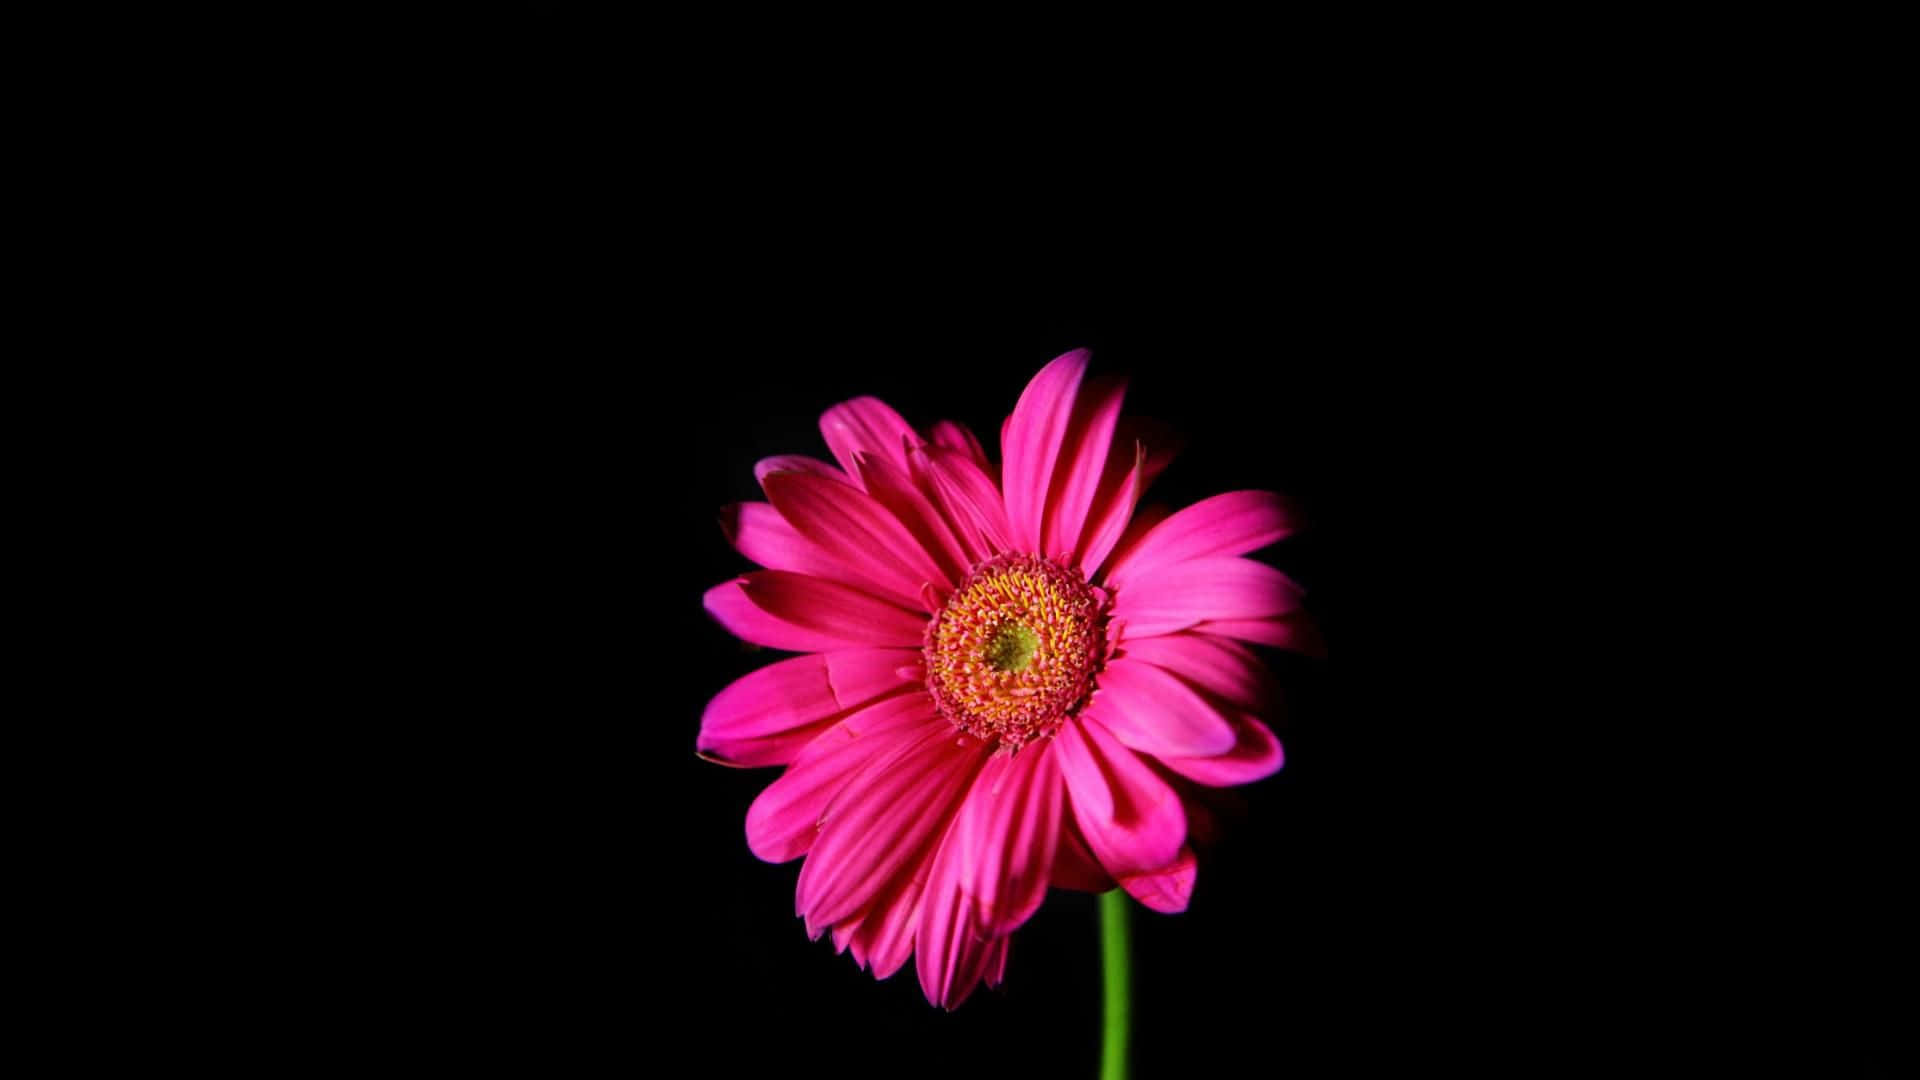 Gerbera Flower Macro Photography Pink And Black Background